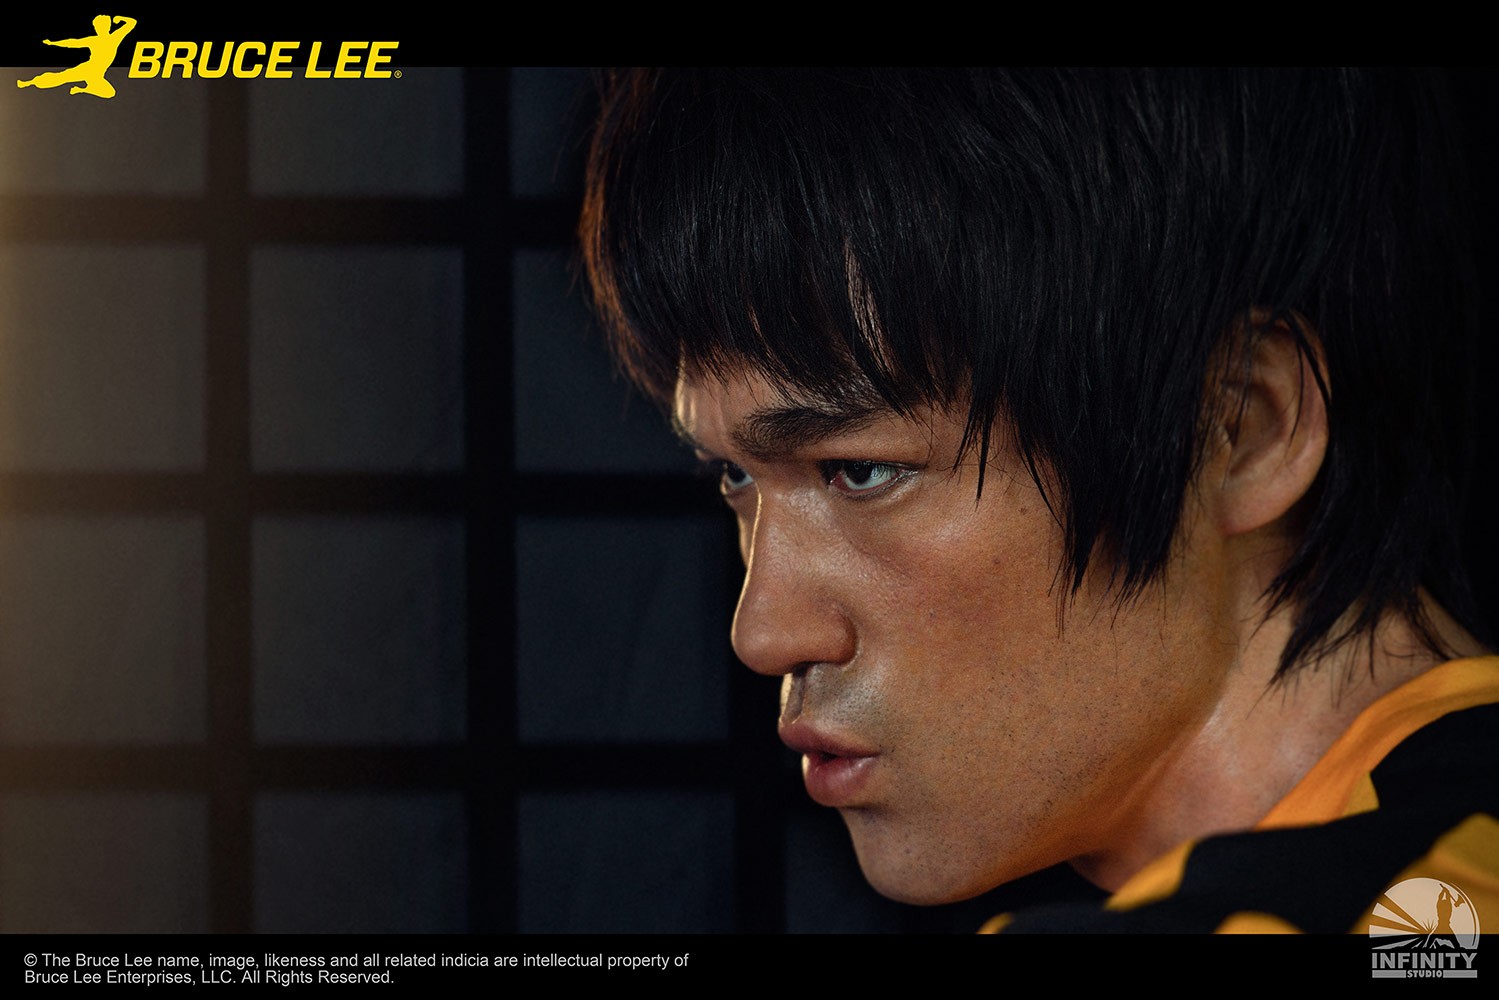 Bruce Lee Life-Size Bust by Infinity Studio | Sideshow Collectibles